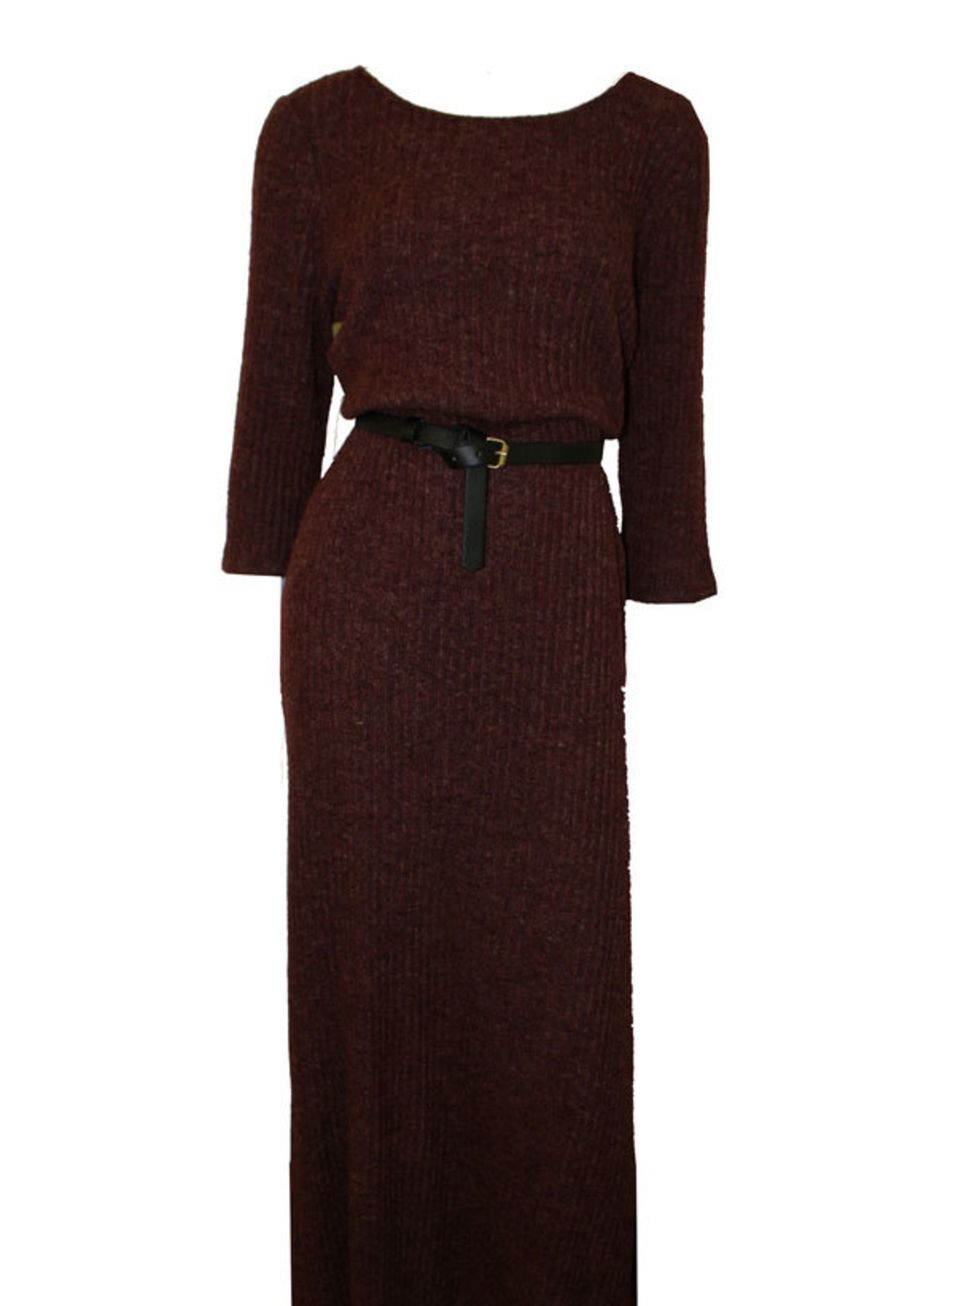 <p>Minkpink burgundy knit dress, £85, at <a href="http://www.urbanoutfitters.co.uk/">Urban Outfitters </a></p>